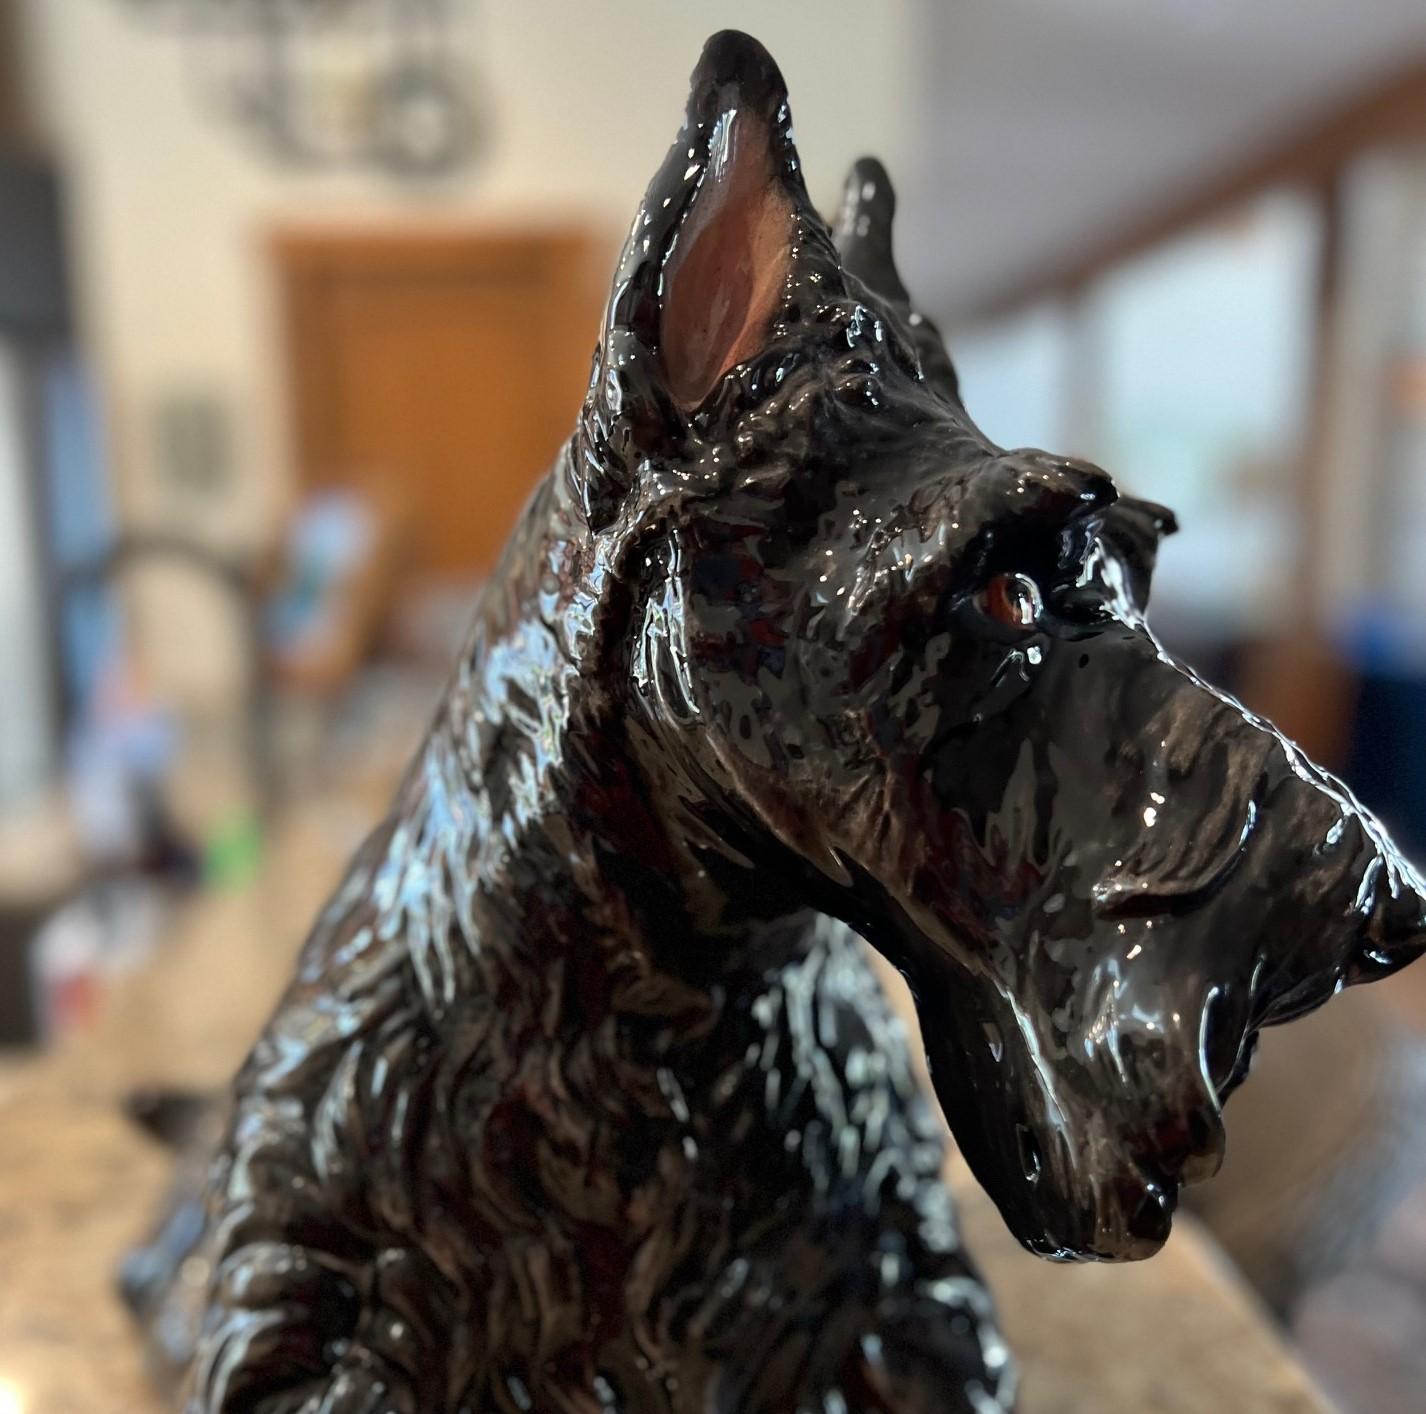 Glazed Vintage Ceramic Scottie Dog Figure - The Townsend Ceramic and Glass Co. Florida For Sale